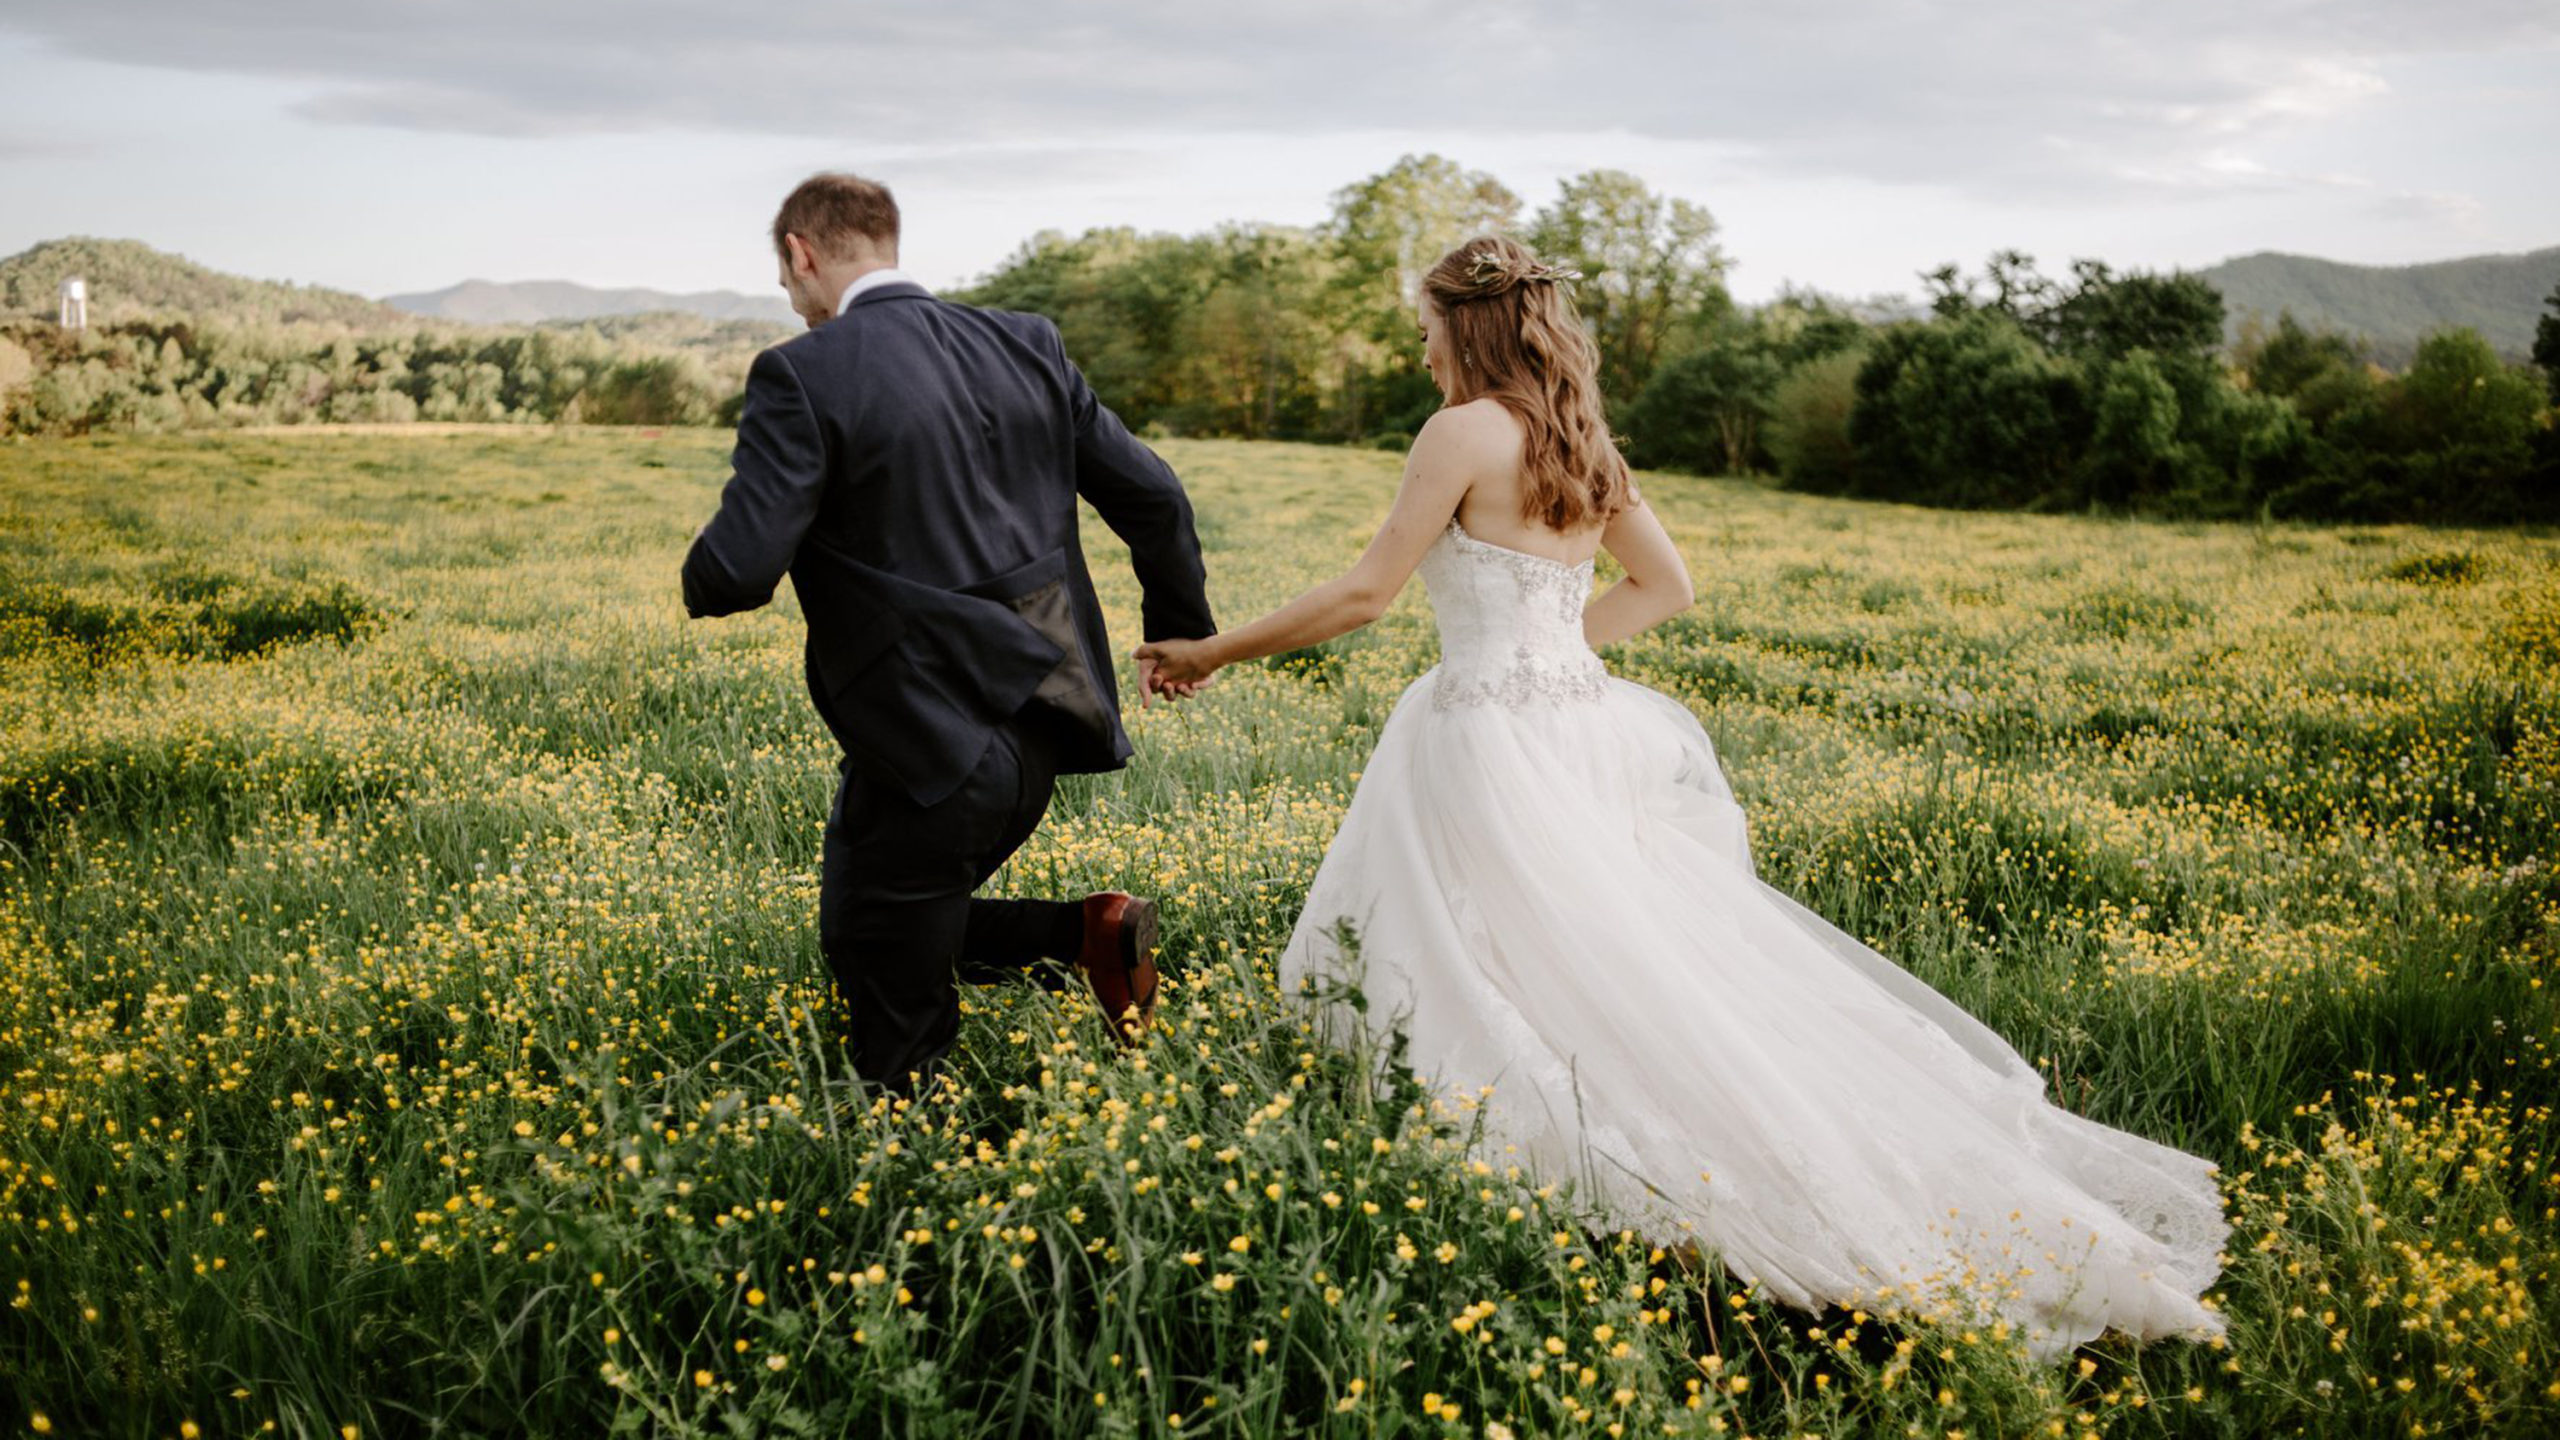 35 Fun and Romantic Activities For Newly-Weds You Should pic